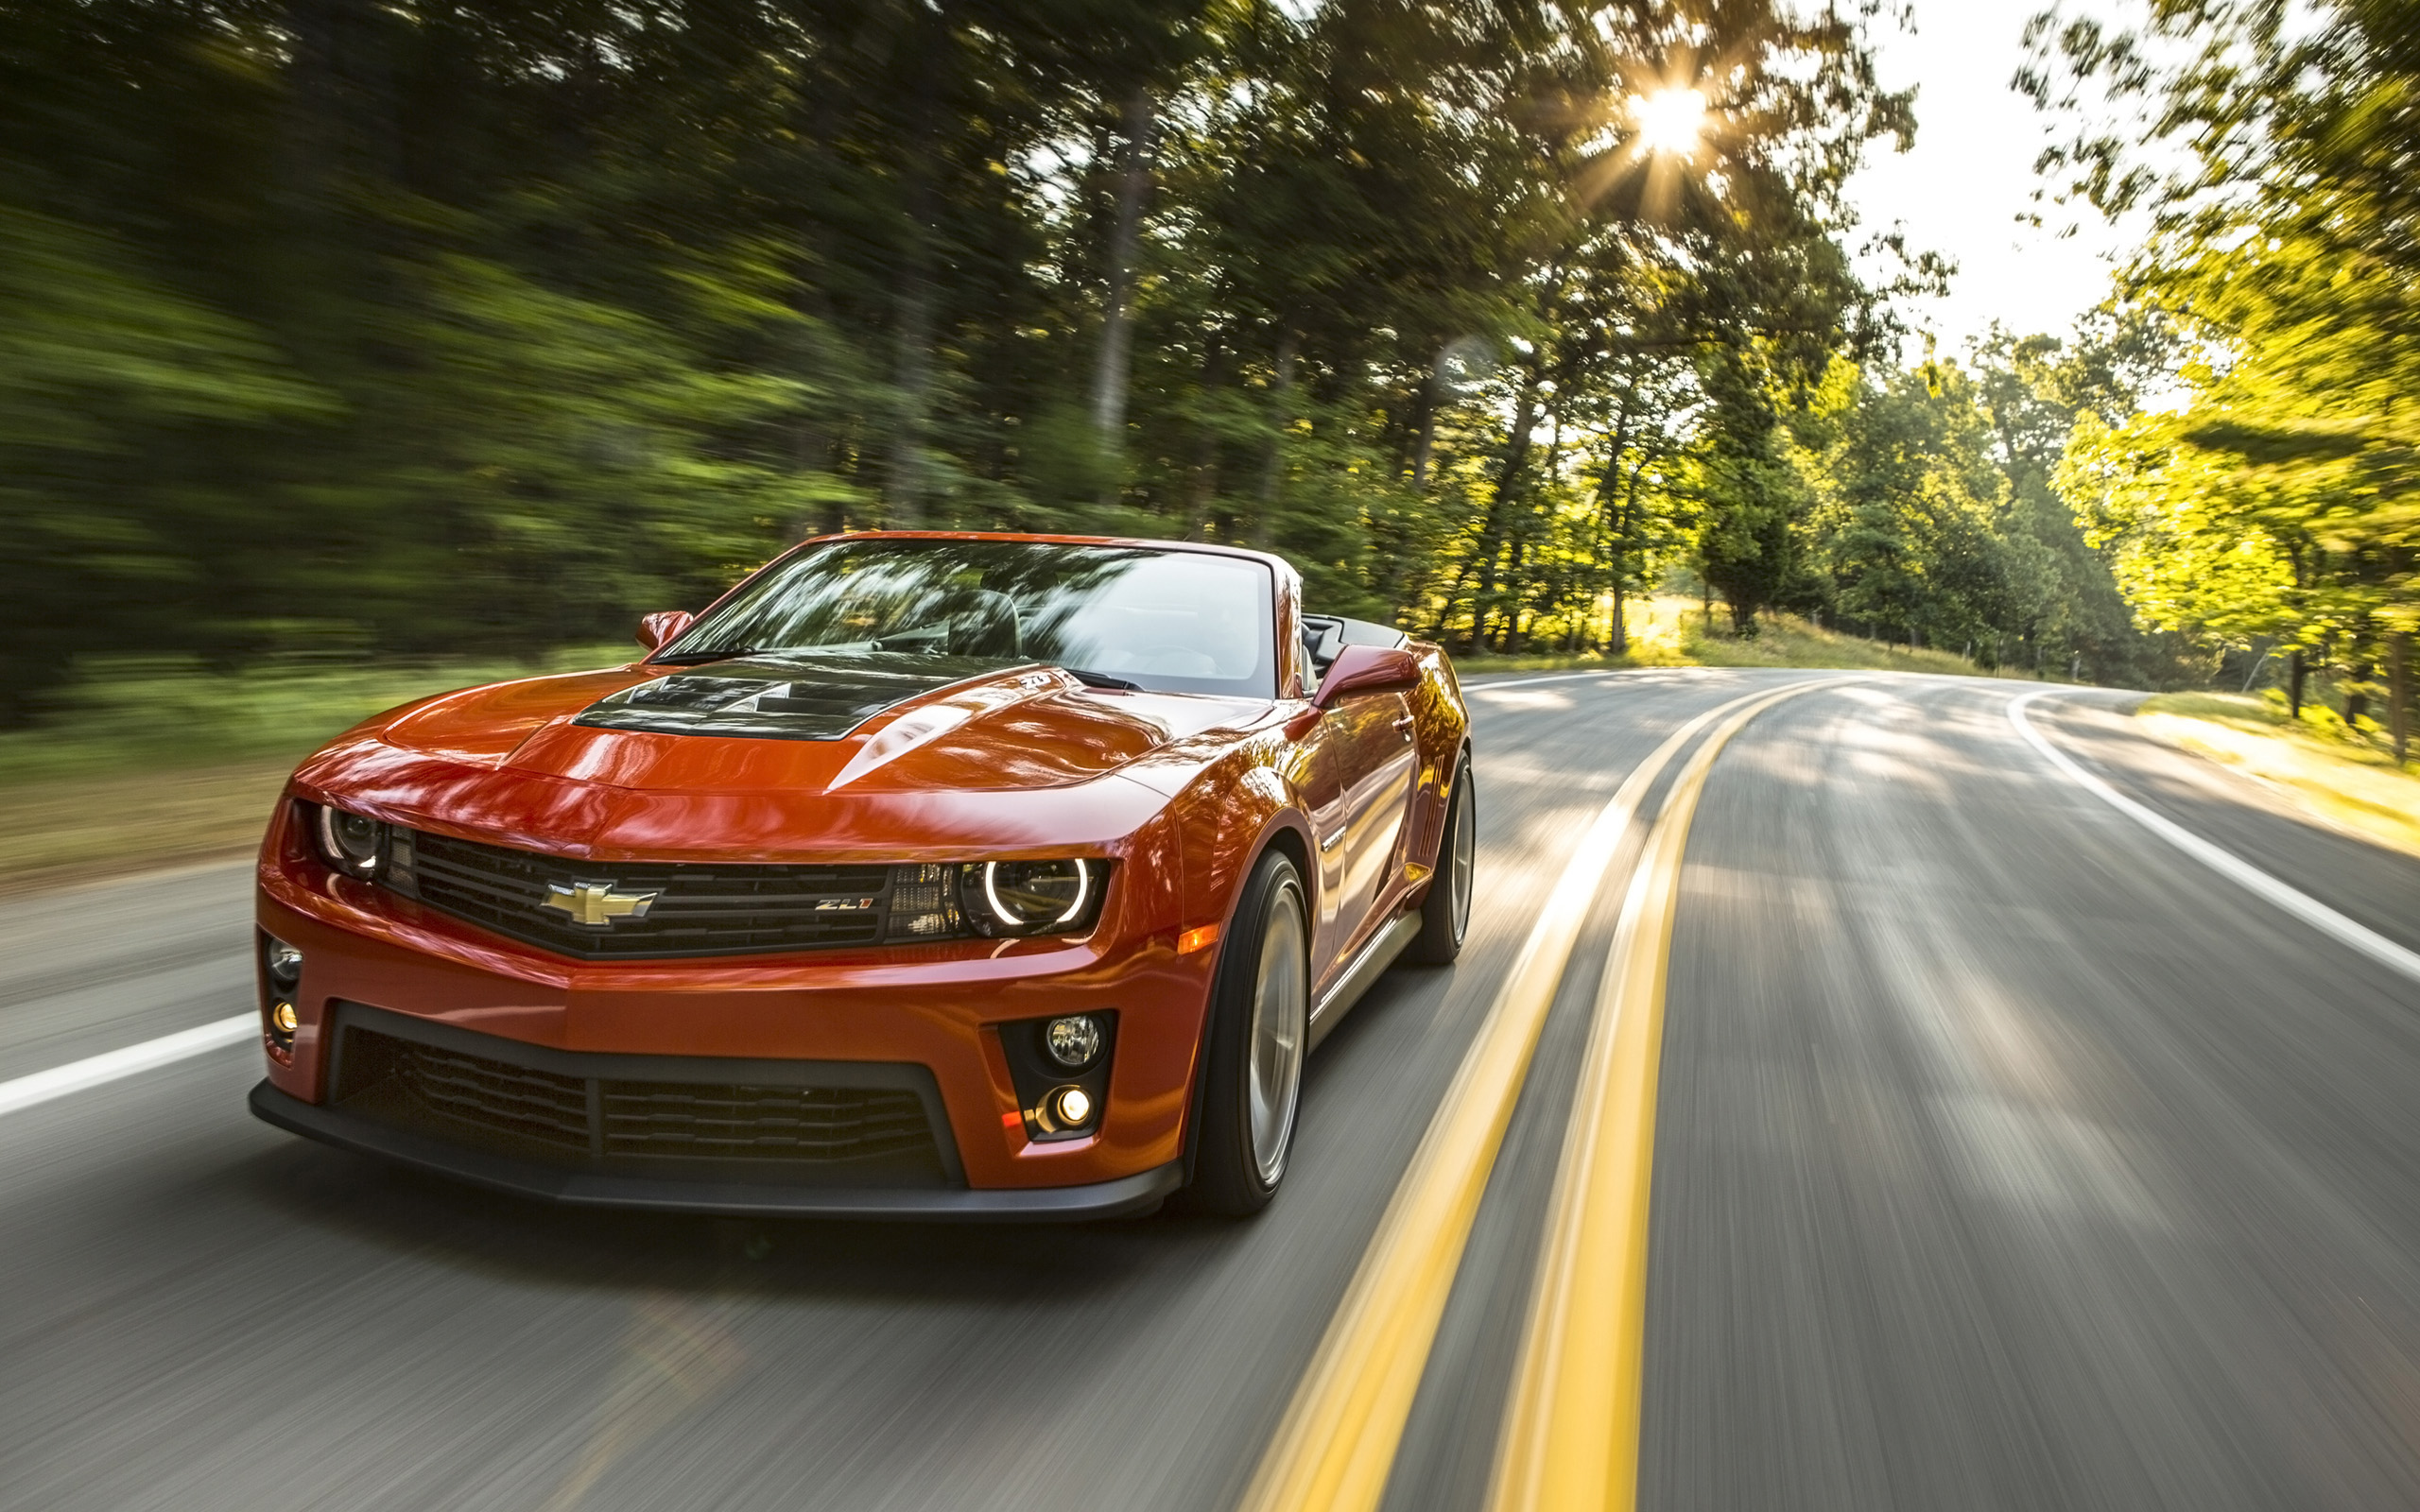 Zl1 Wallpaper Related Keywords Suggestions Long Tail